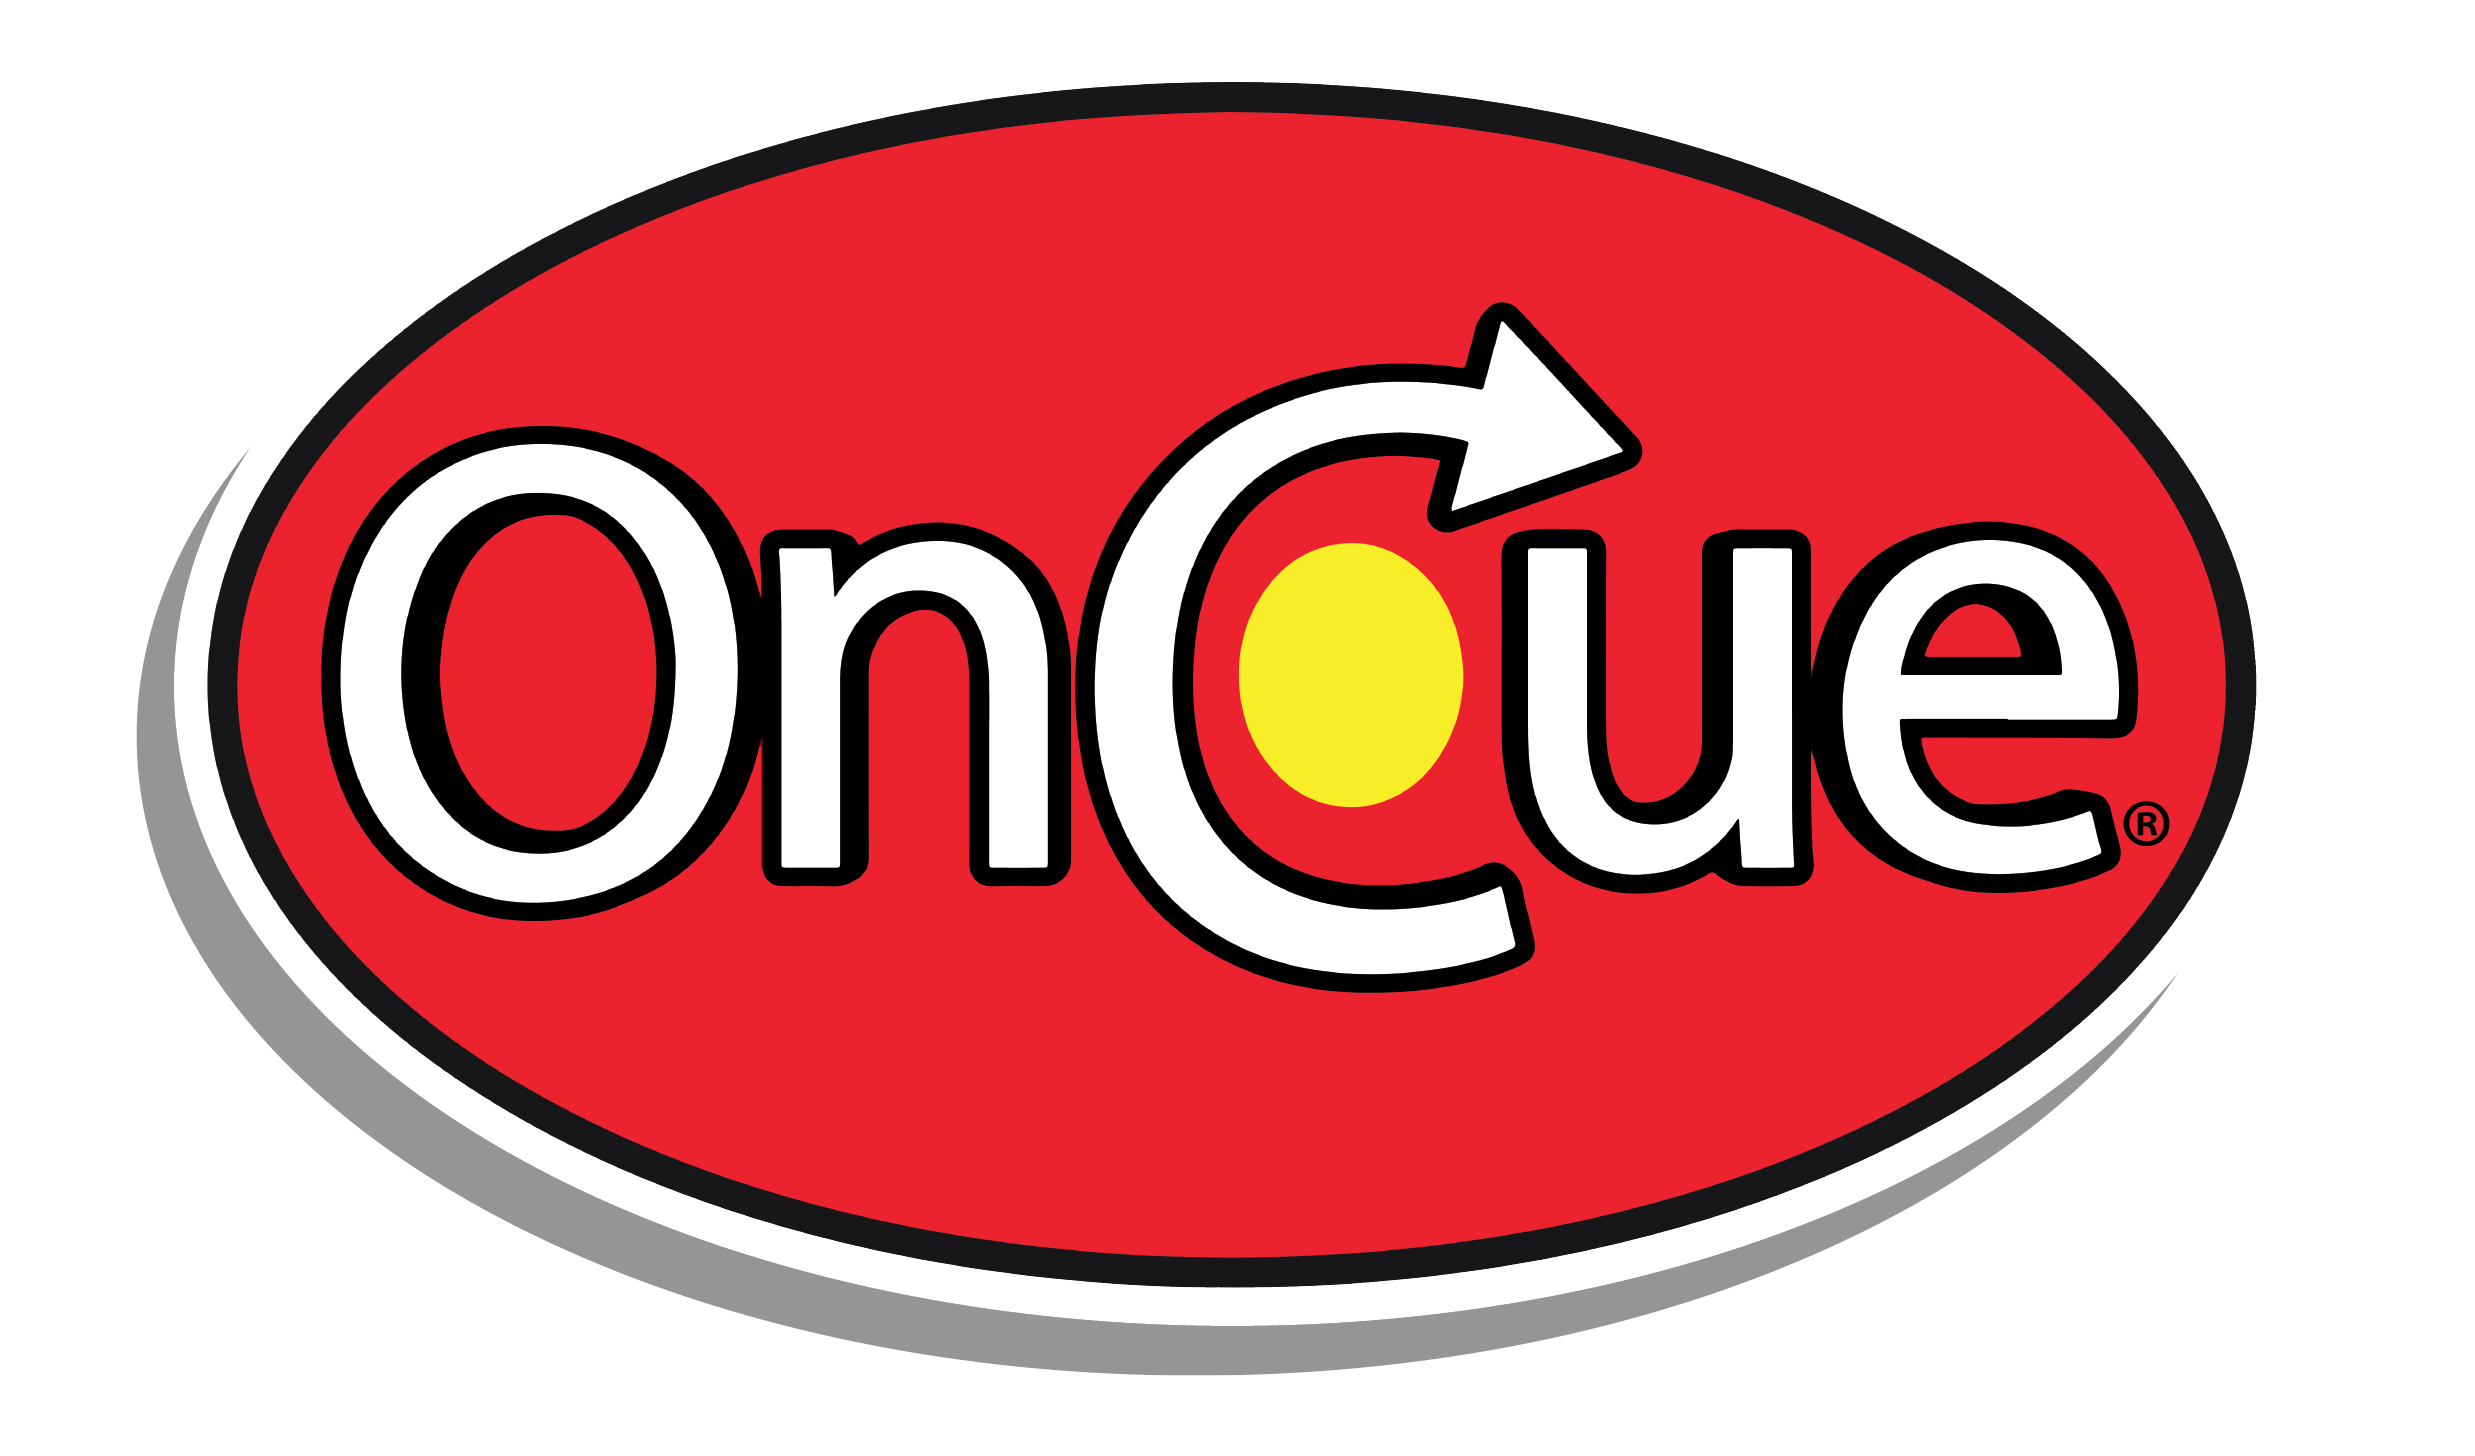 OnCue Express